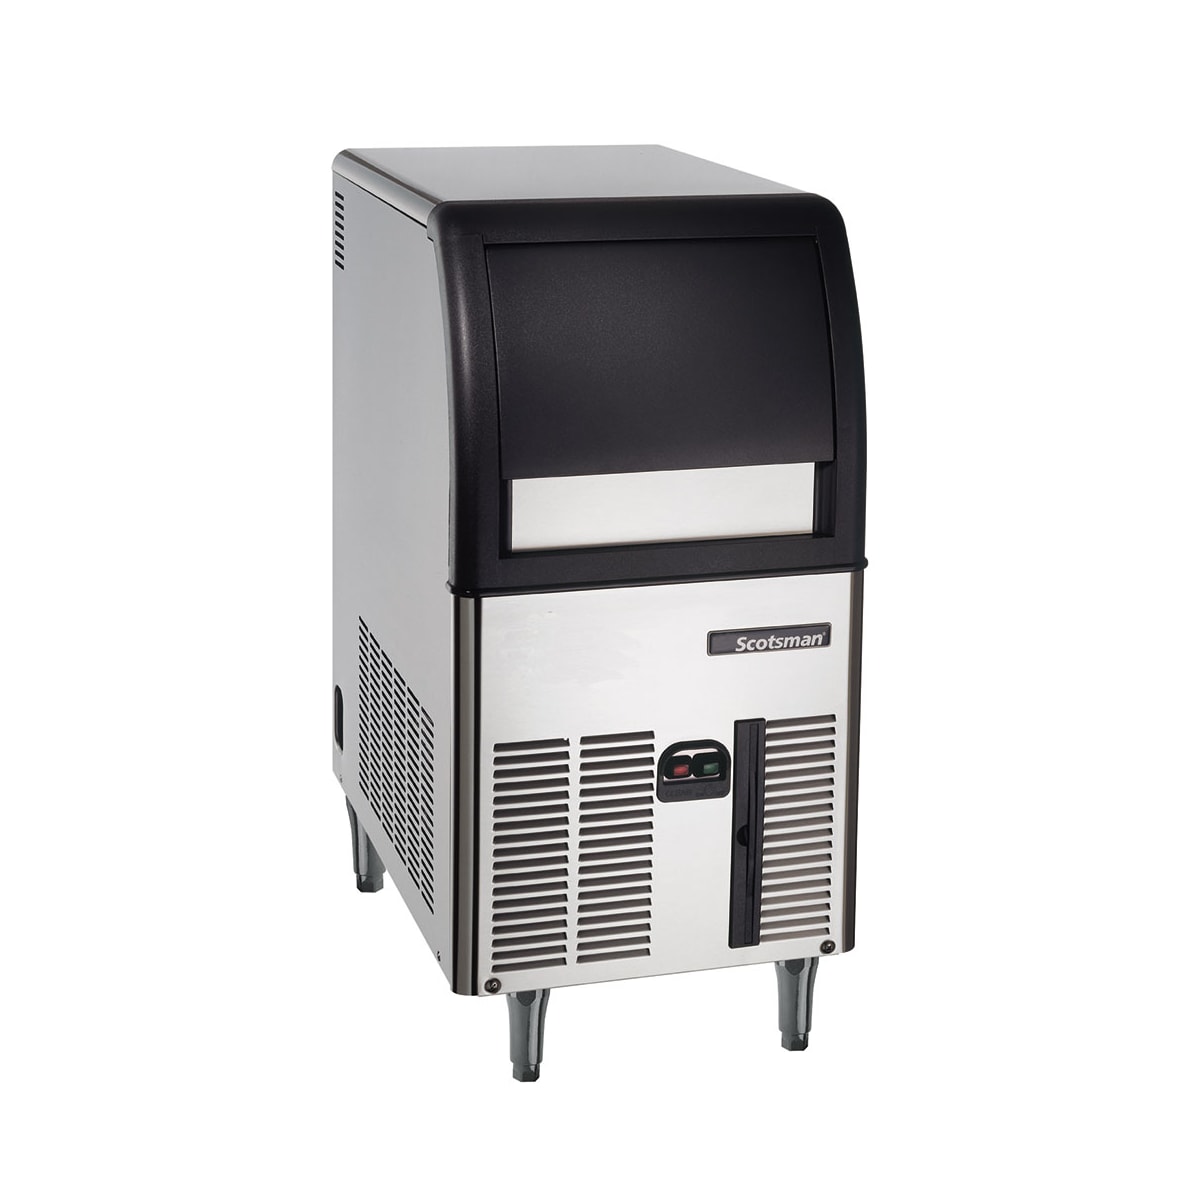 Scotsman UN324A-1, 24 Air Cooled Nugget Ice Undercounter Ice Machine, 340 lb